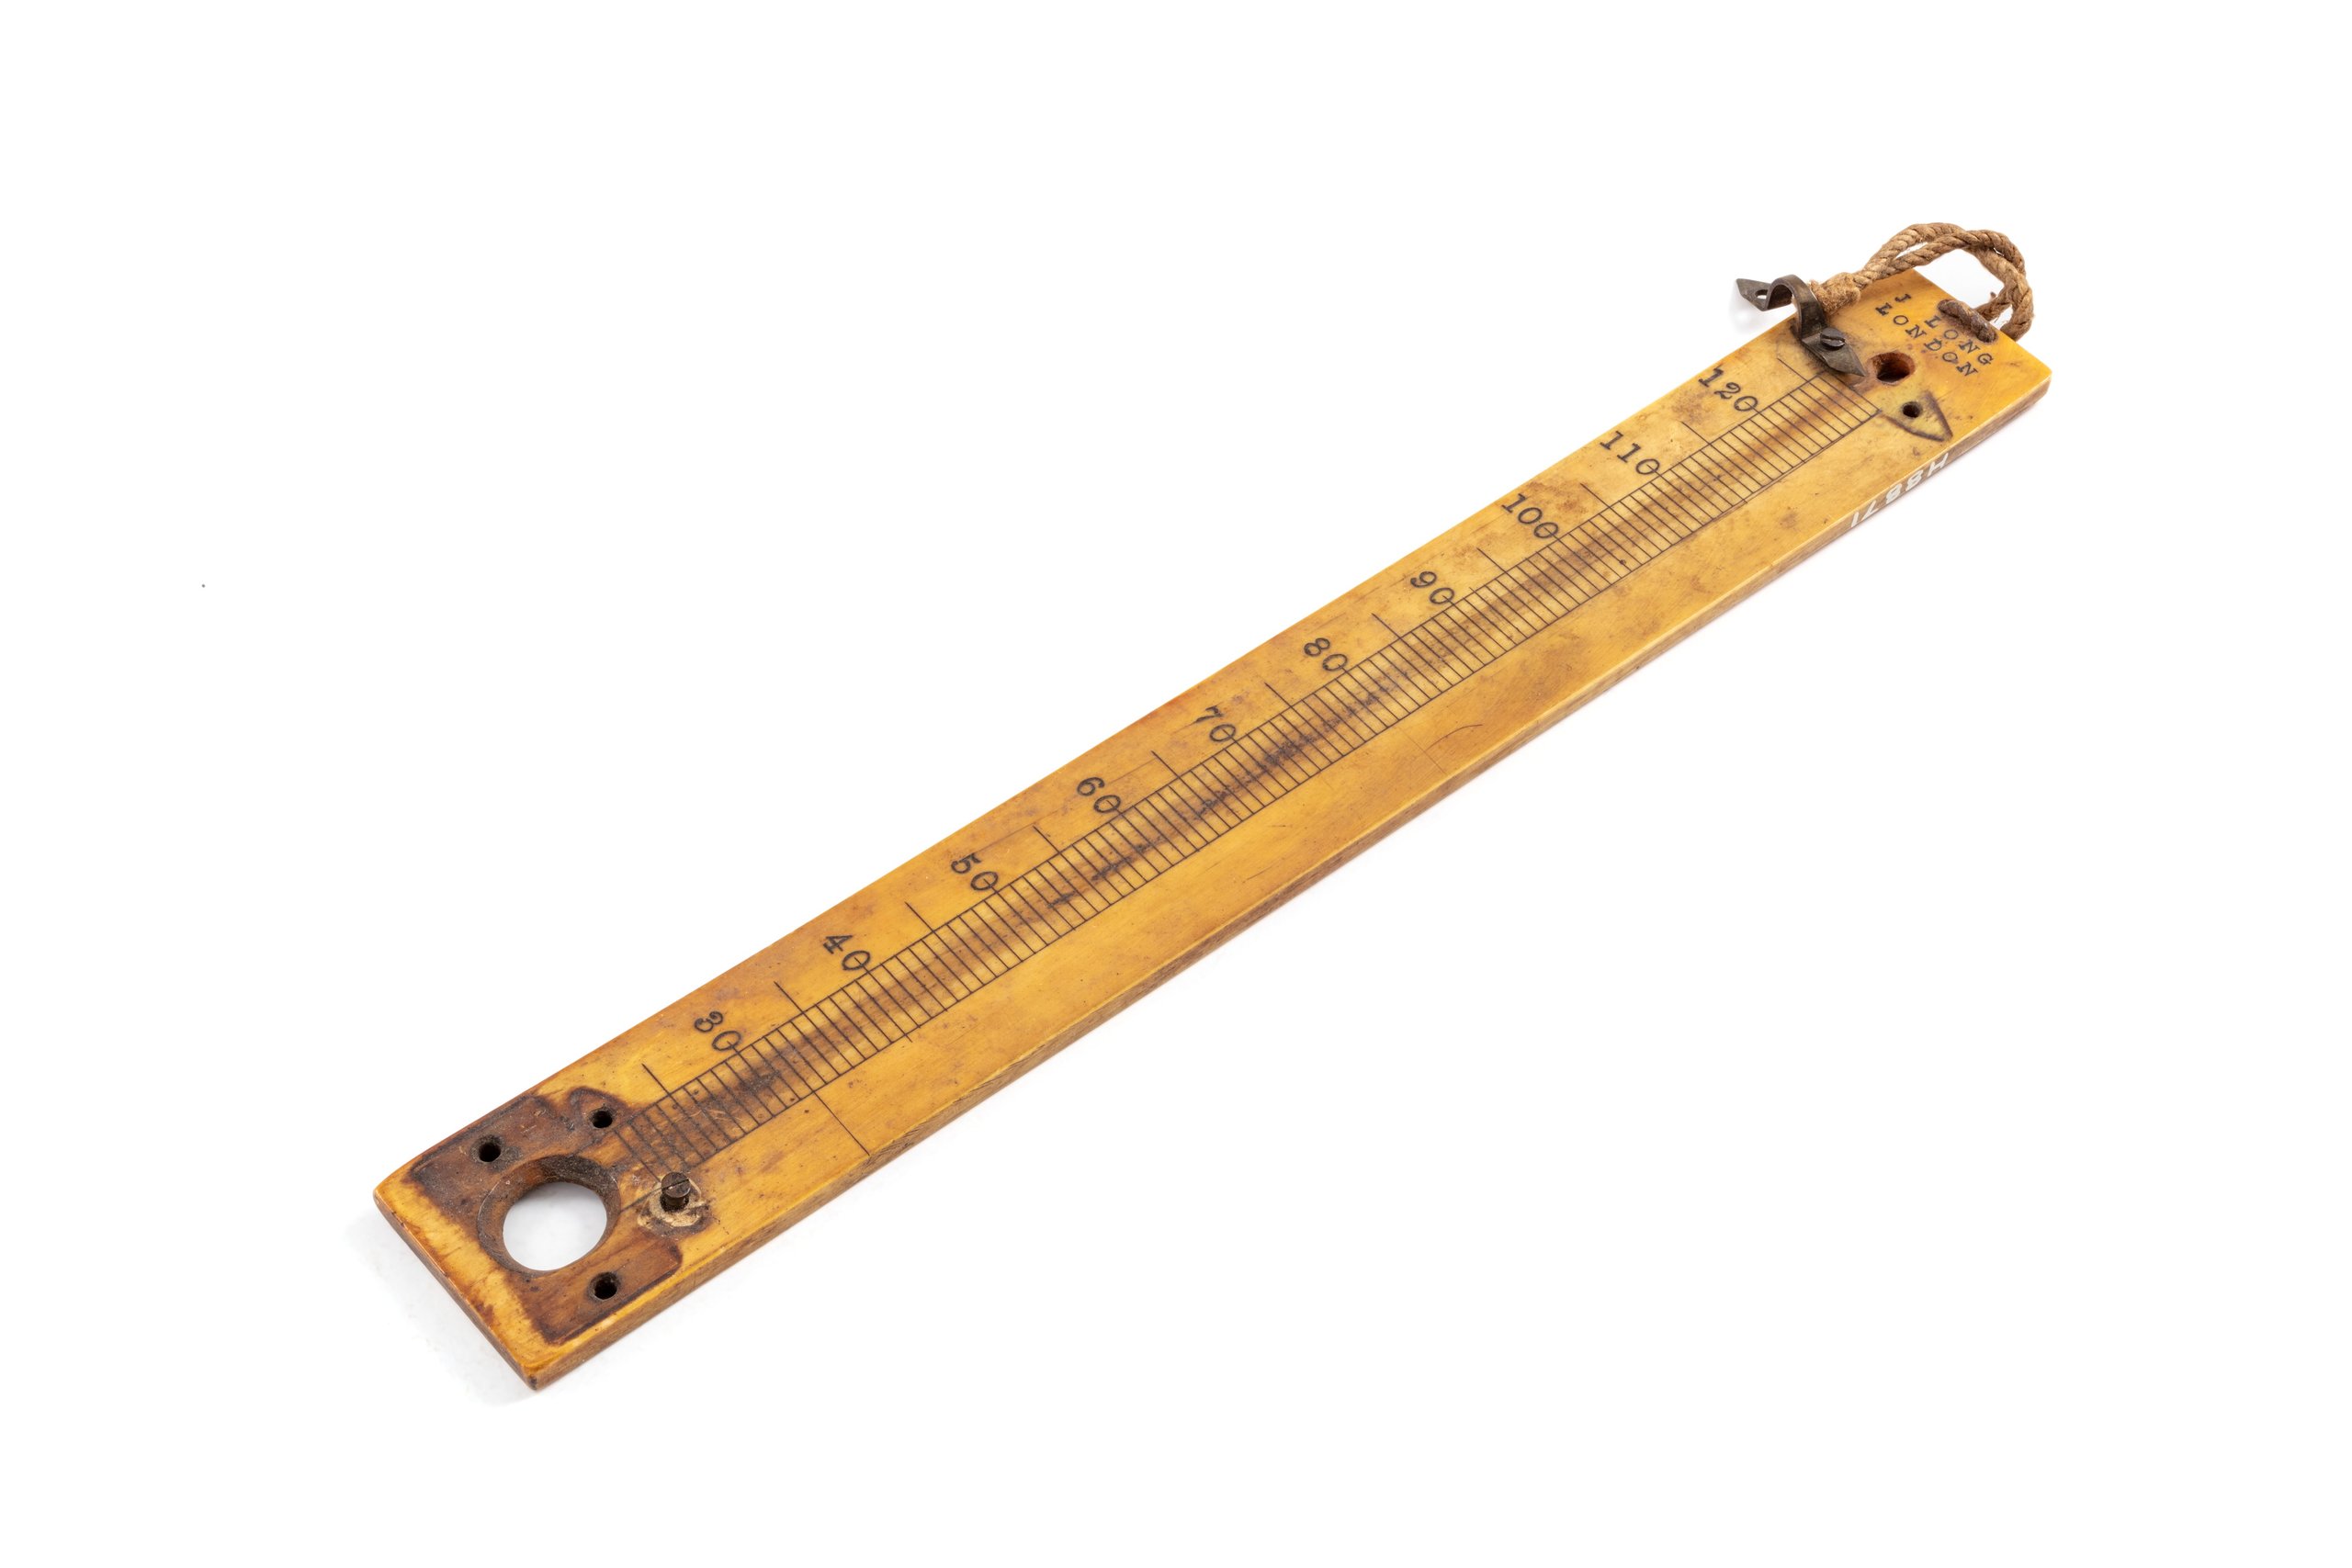 Thermometer scale